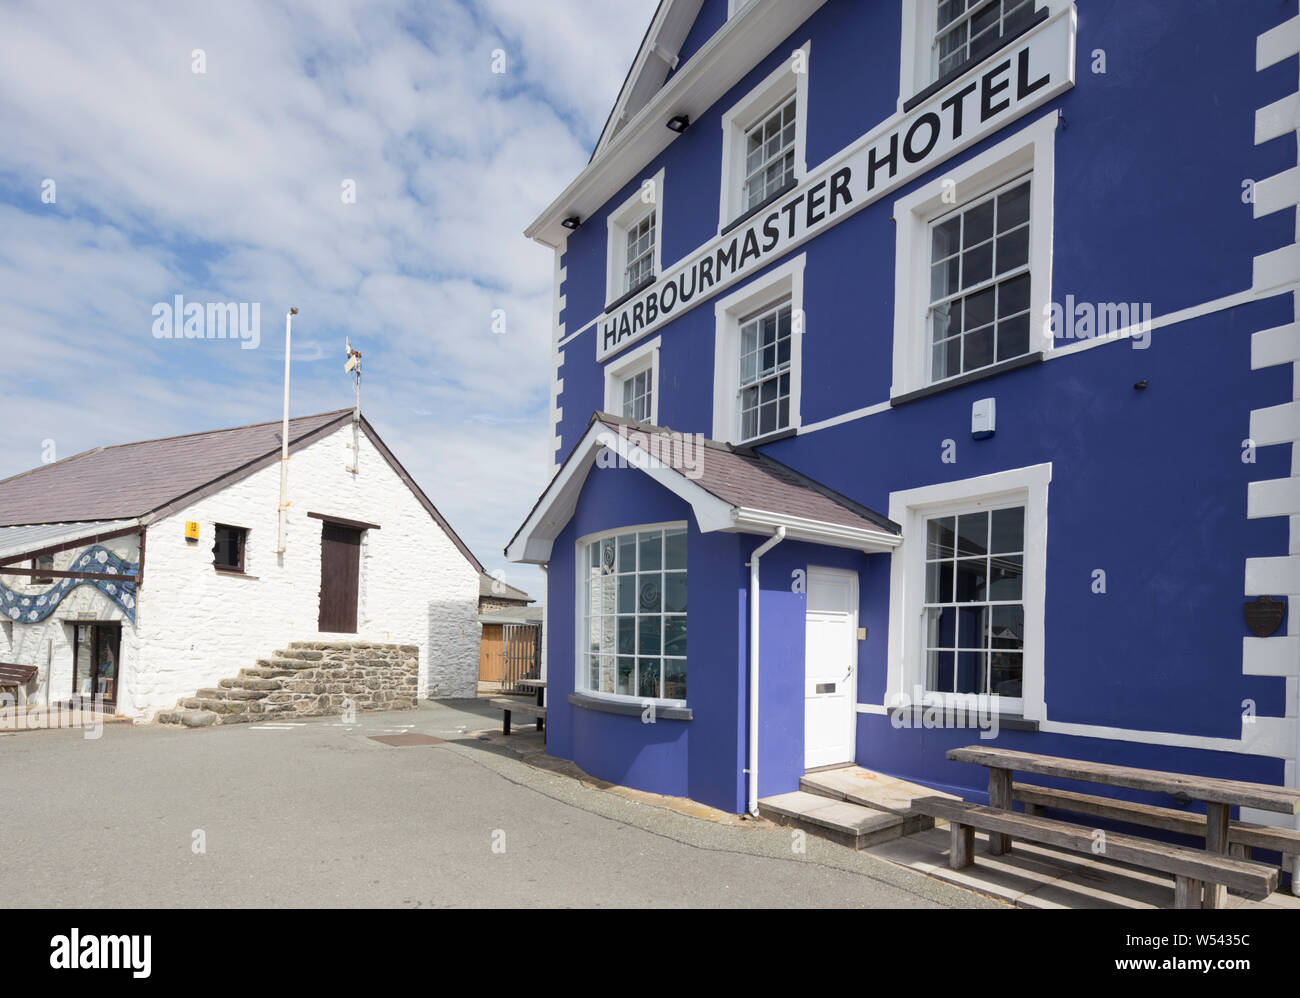 The Harbour Master Hotel in Aberaeron a popular seaside town in Ceredigion, Wales, UK Stock Photo